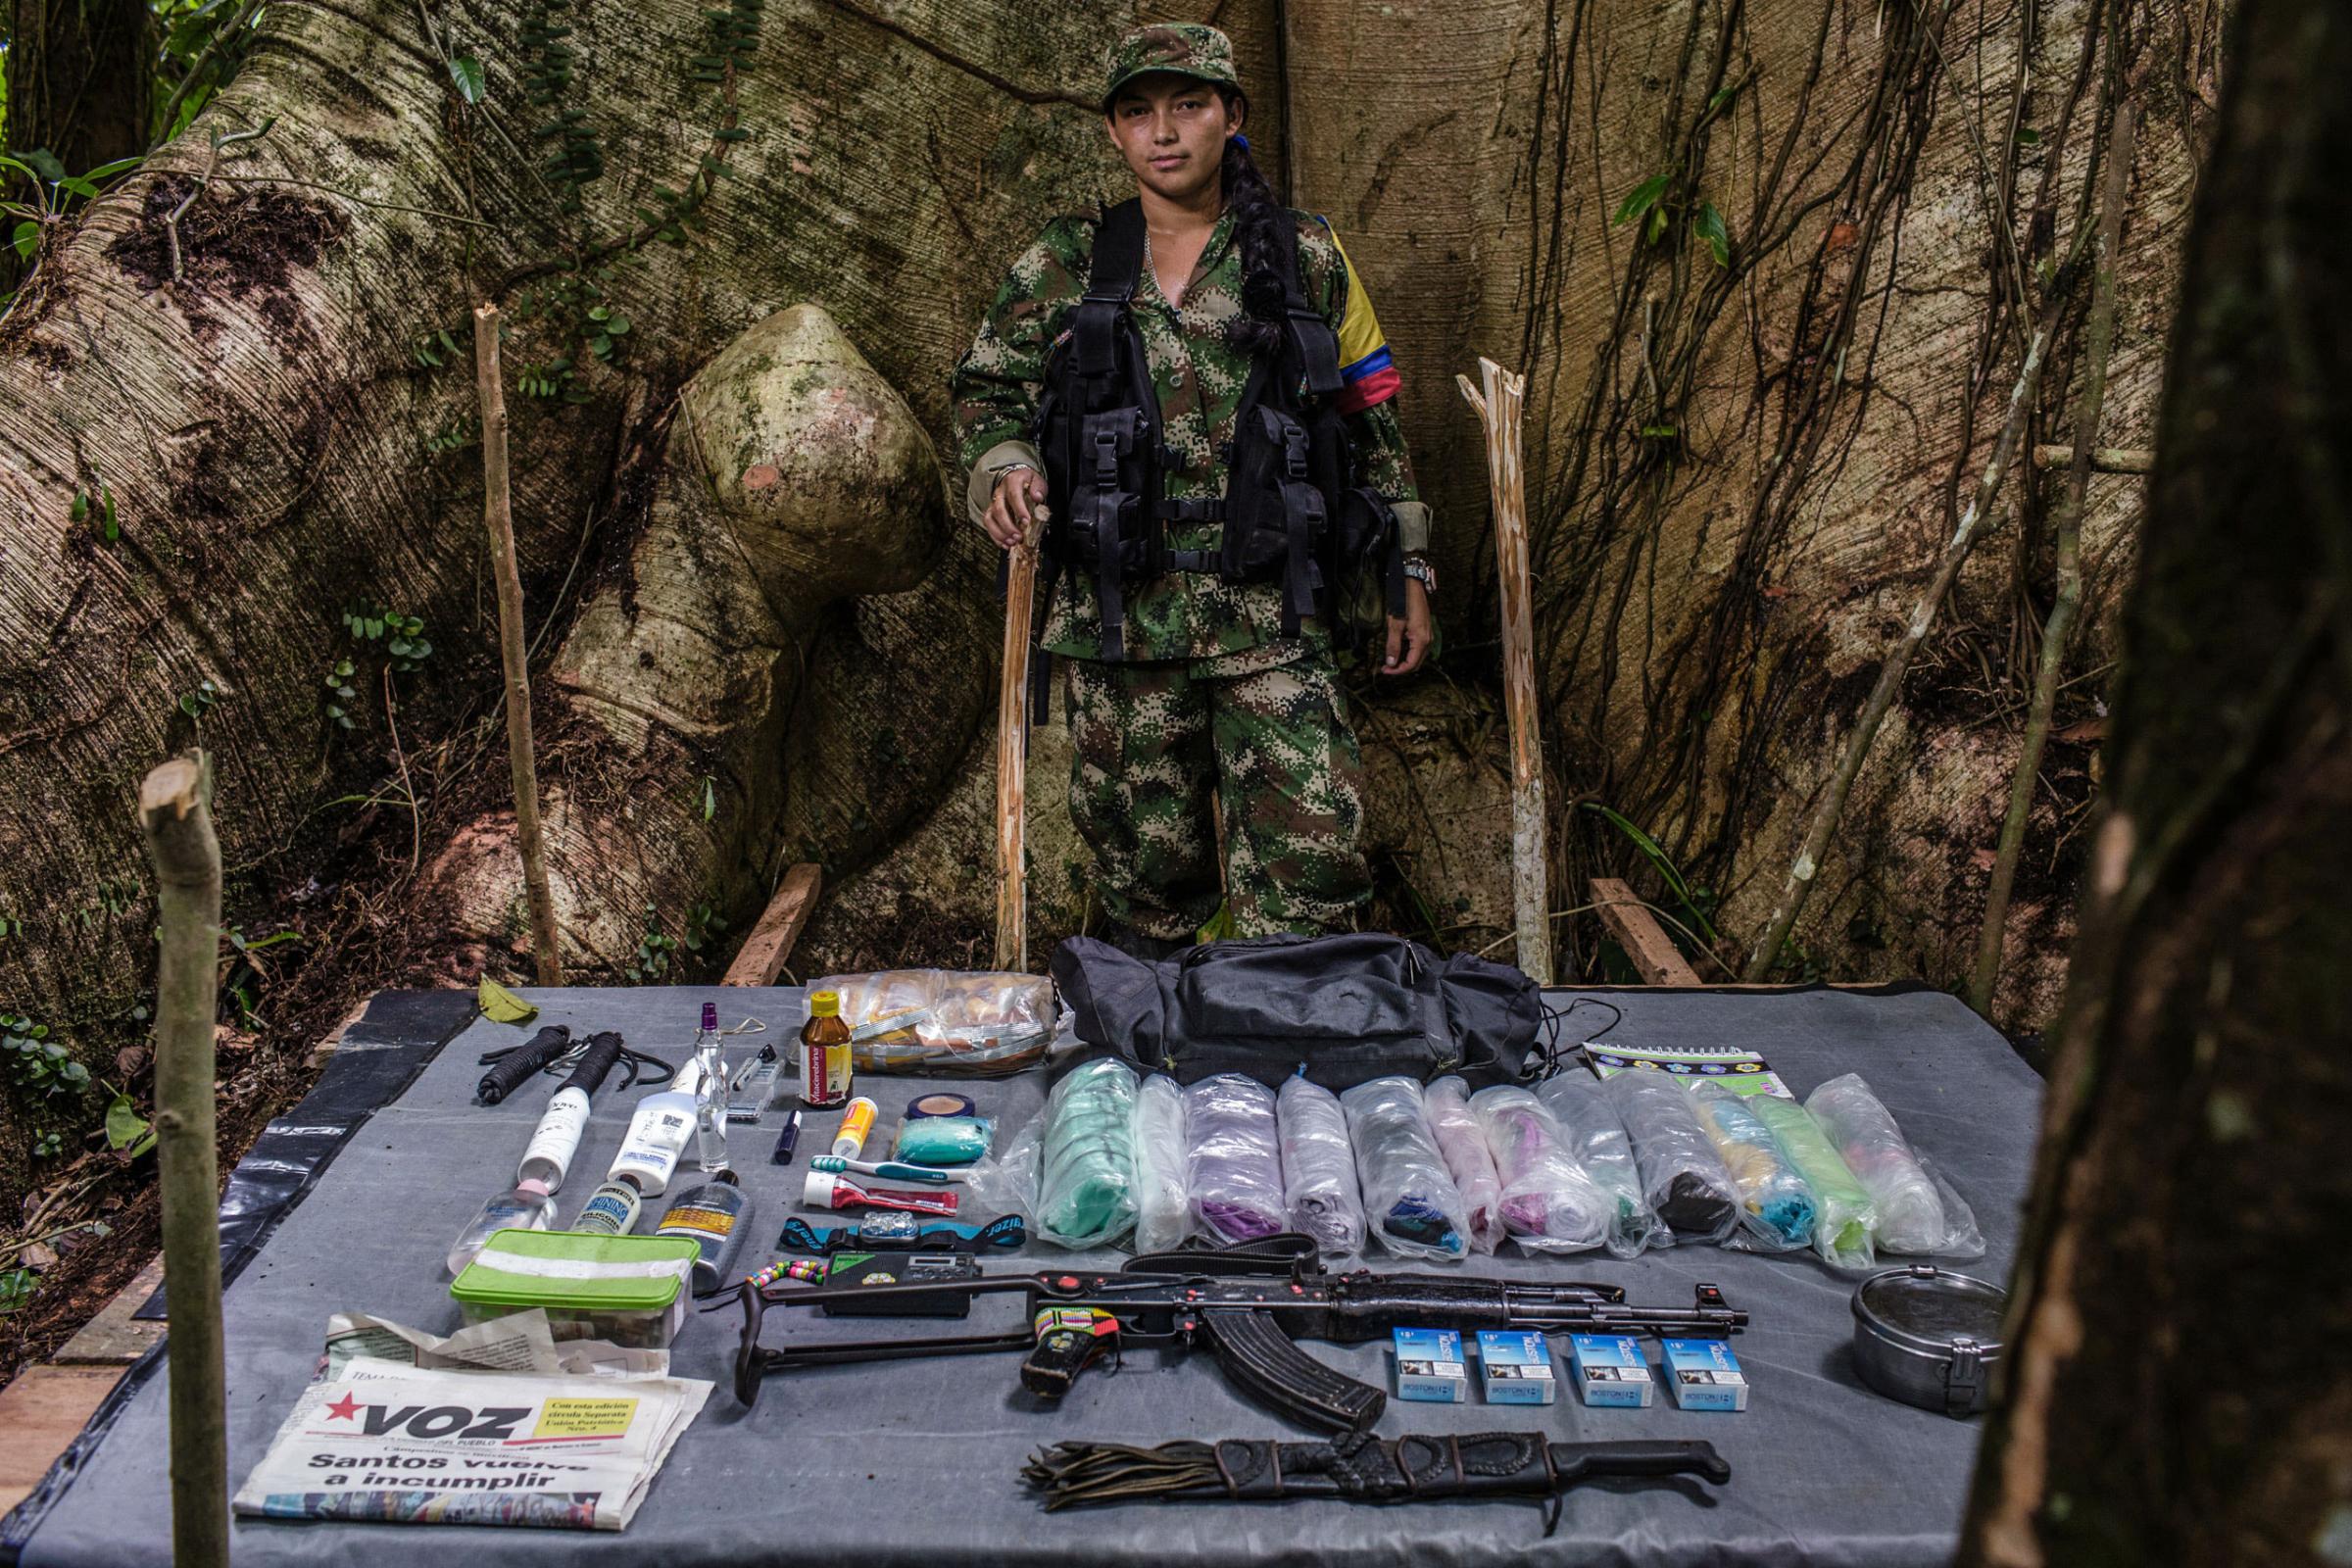 "Mariana", 24-years old, has been with FARC for five years.She joined FARC because she was a victim of paramilitary violence in northern Colombia.